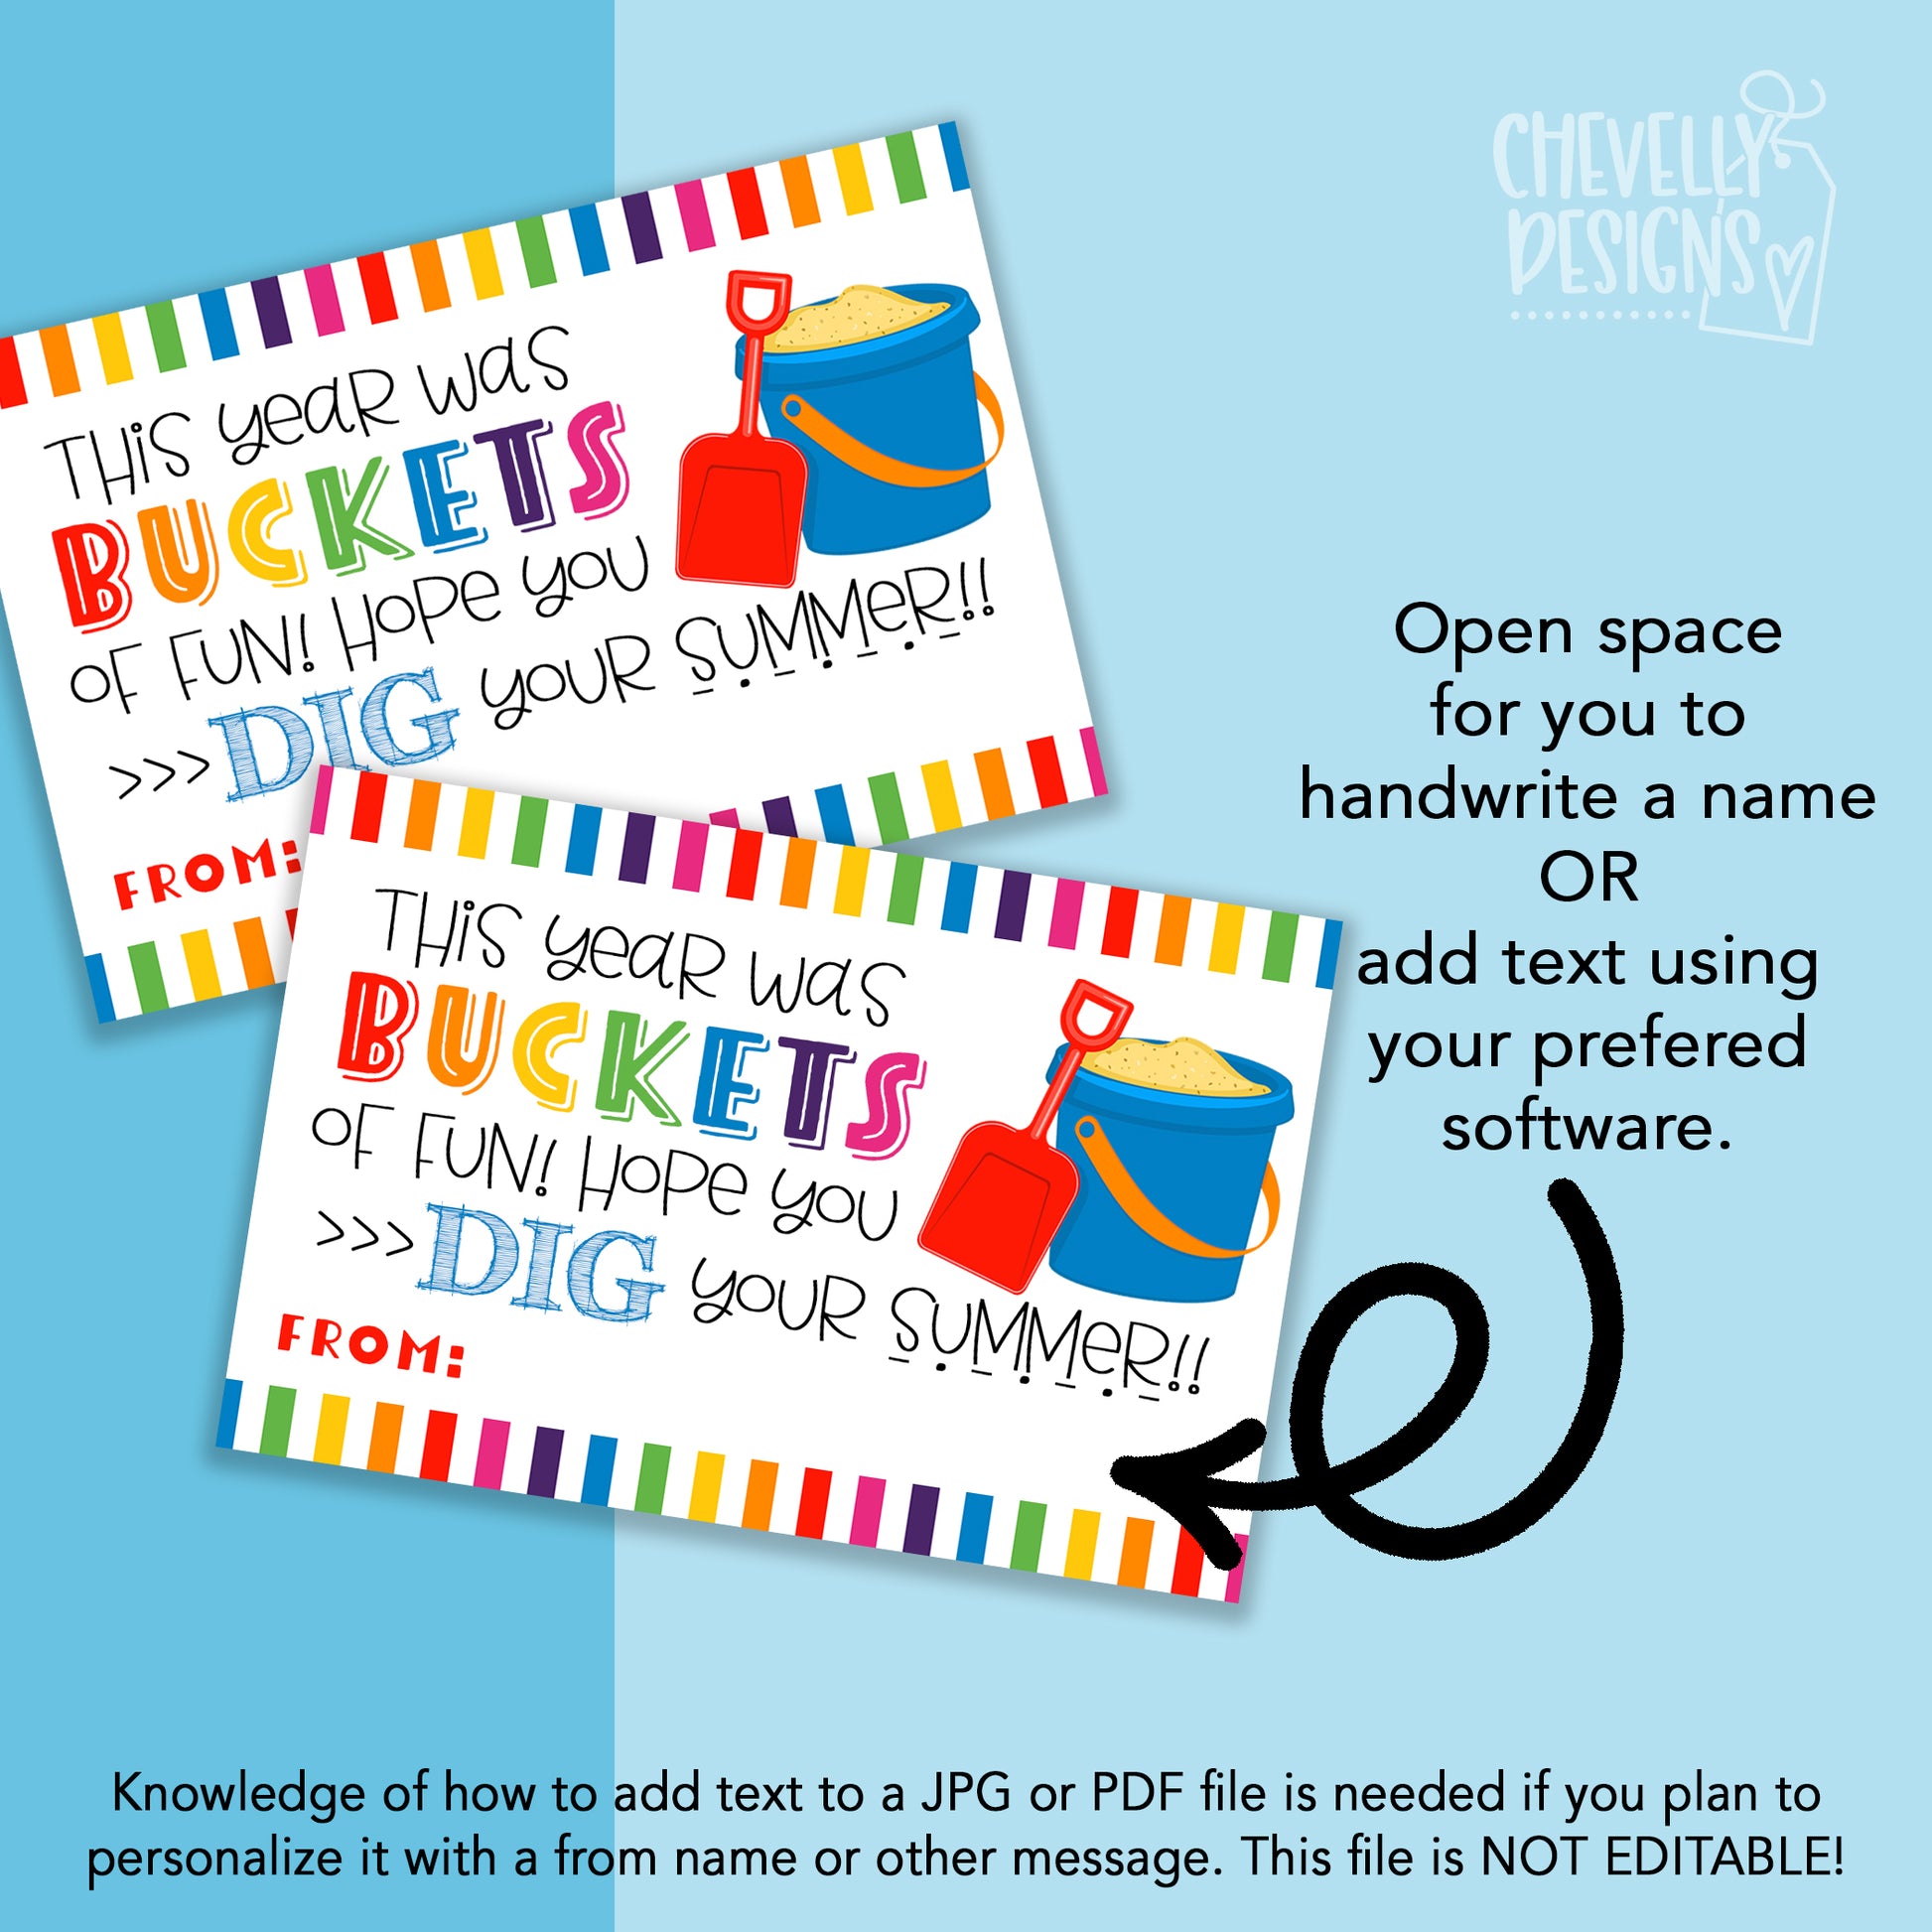 Bubbles Back to School Gift Tag, Printable PDF - My Party Design